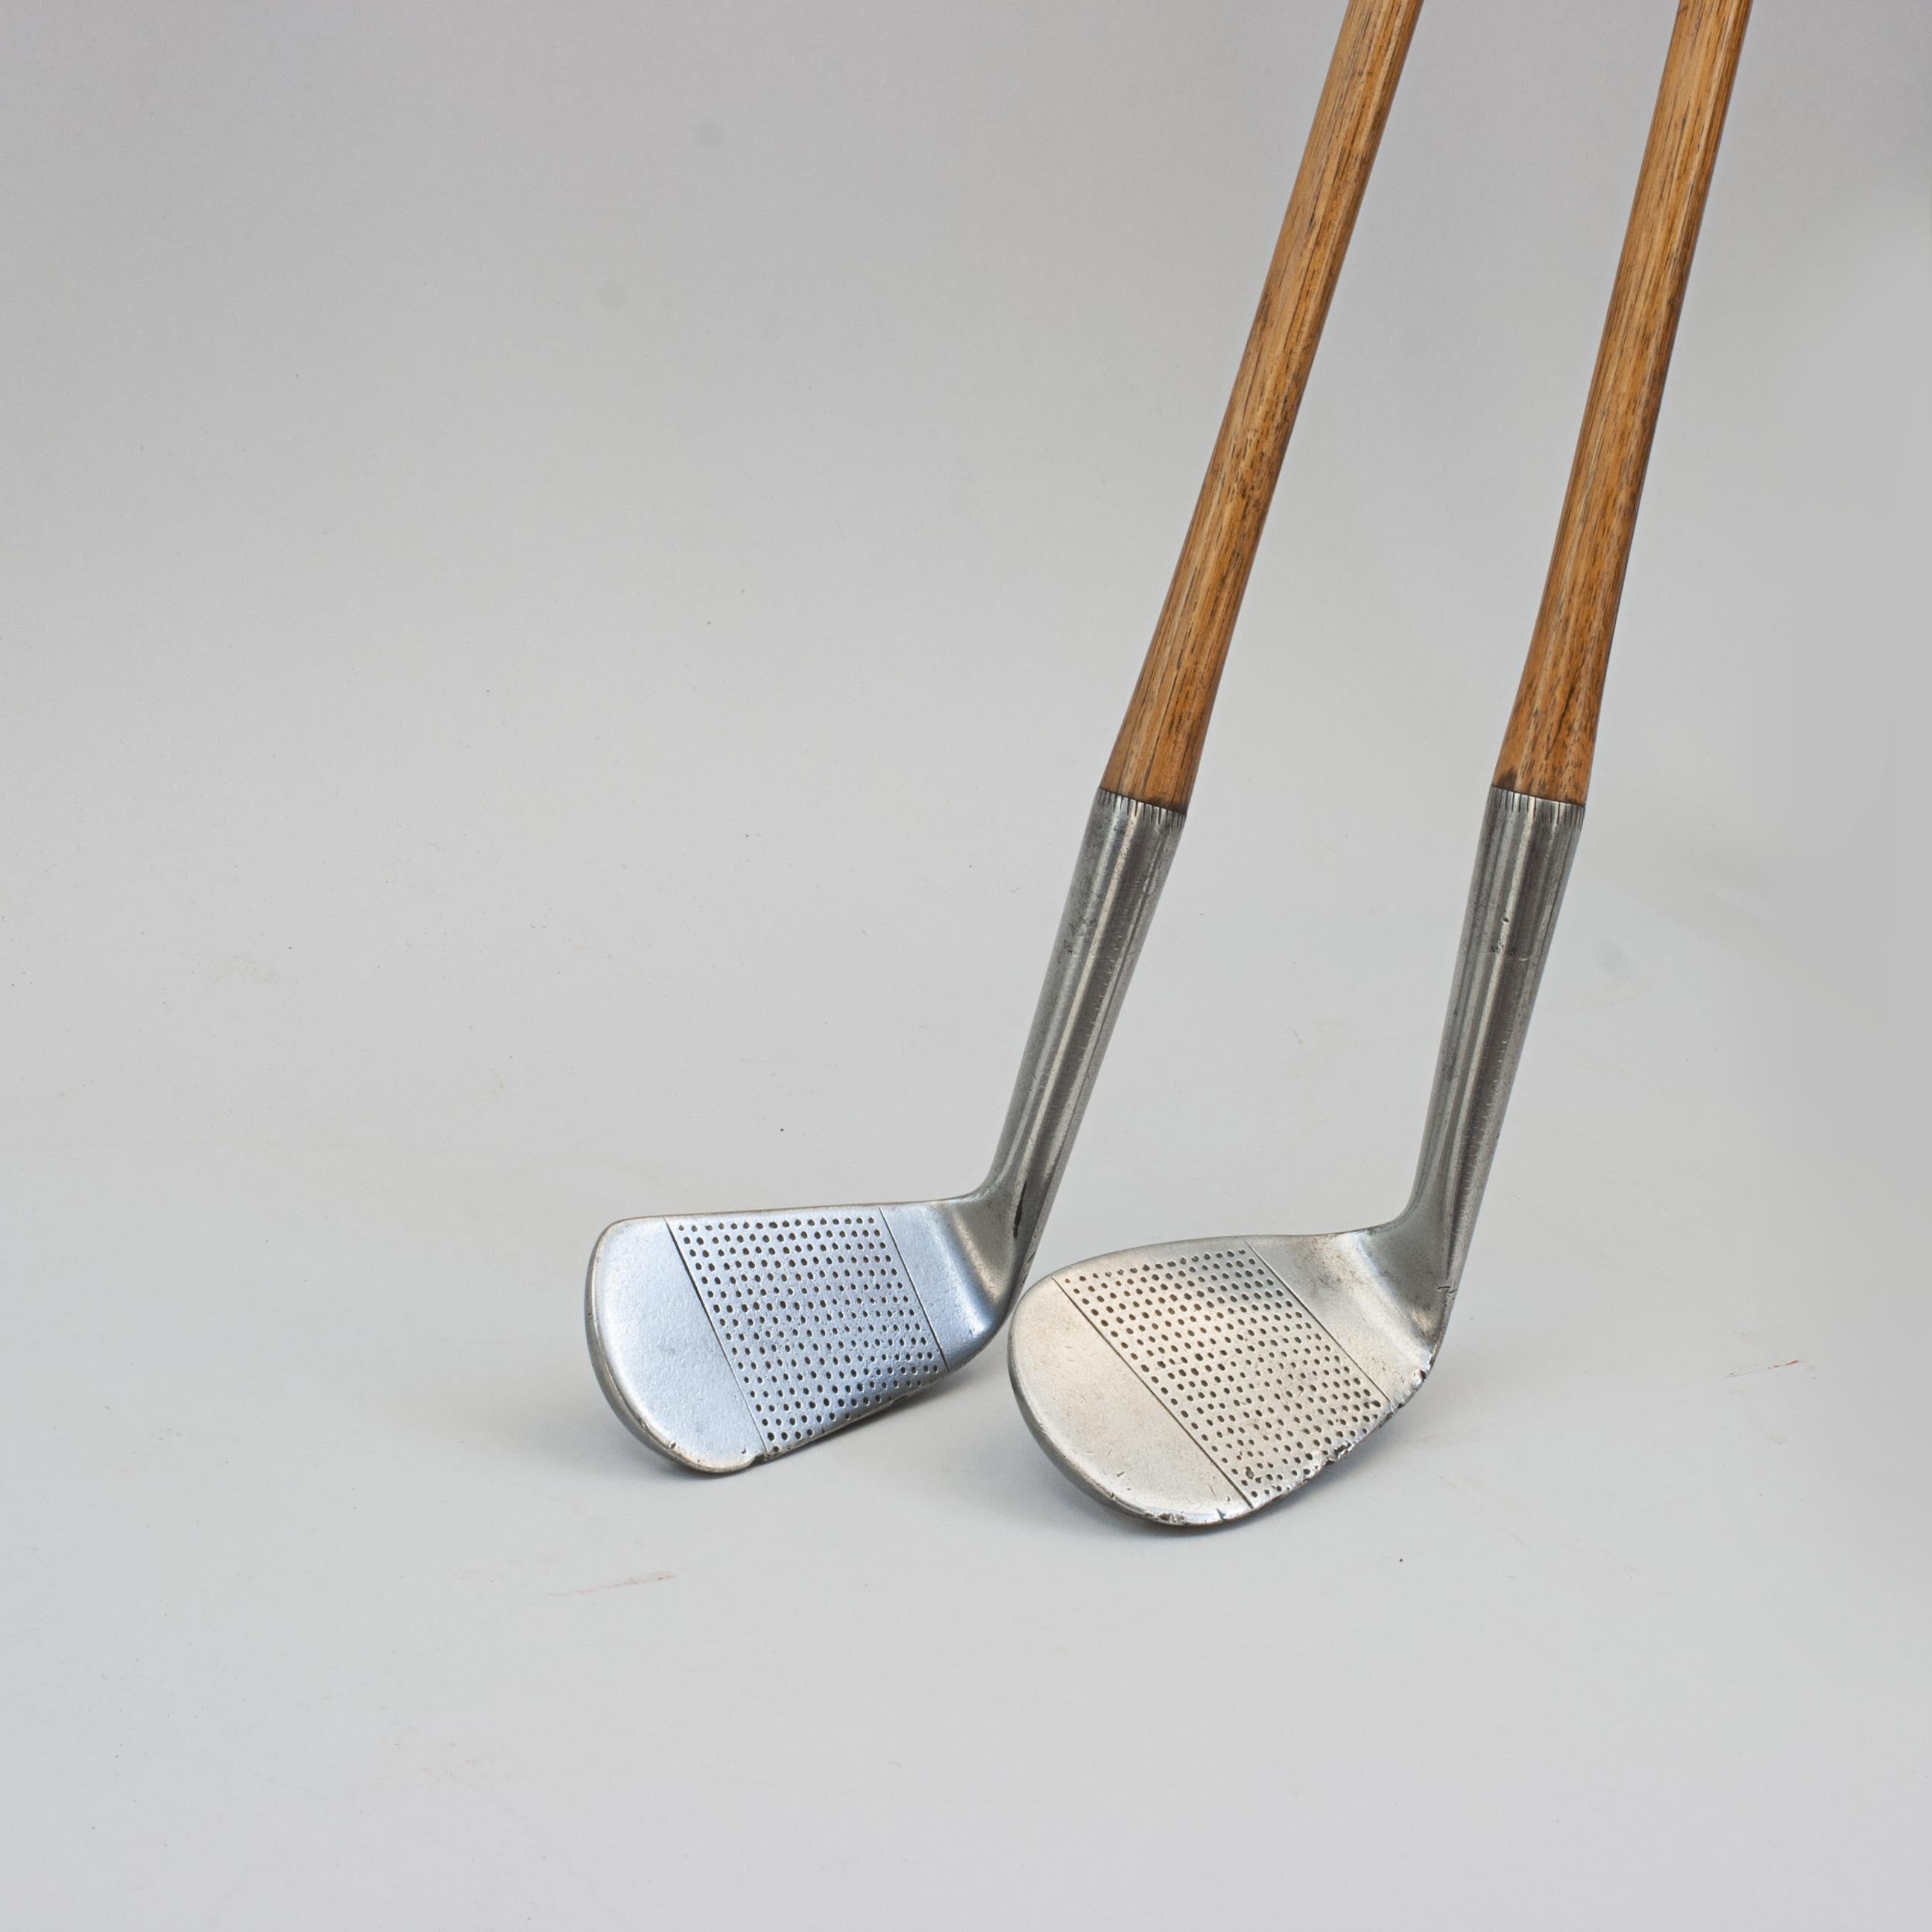 Pair Of R. Forgan Scotia Golf Clubs, Mashie And Niblick.
A good usable pair of hickory shafted 'Scotia' branded golf clubs by Robert Forgan & Son Ltd. of St Andrews. The two clubs, Mashie and Niblick, have original hickory shafts with leather grips,